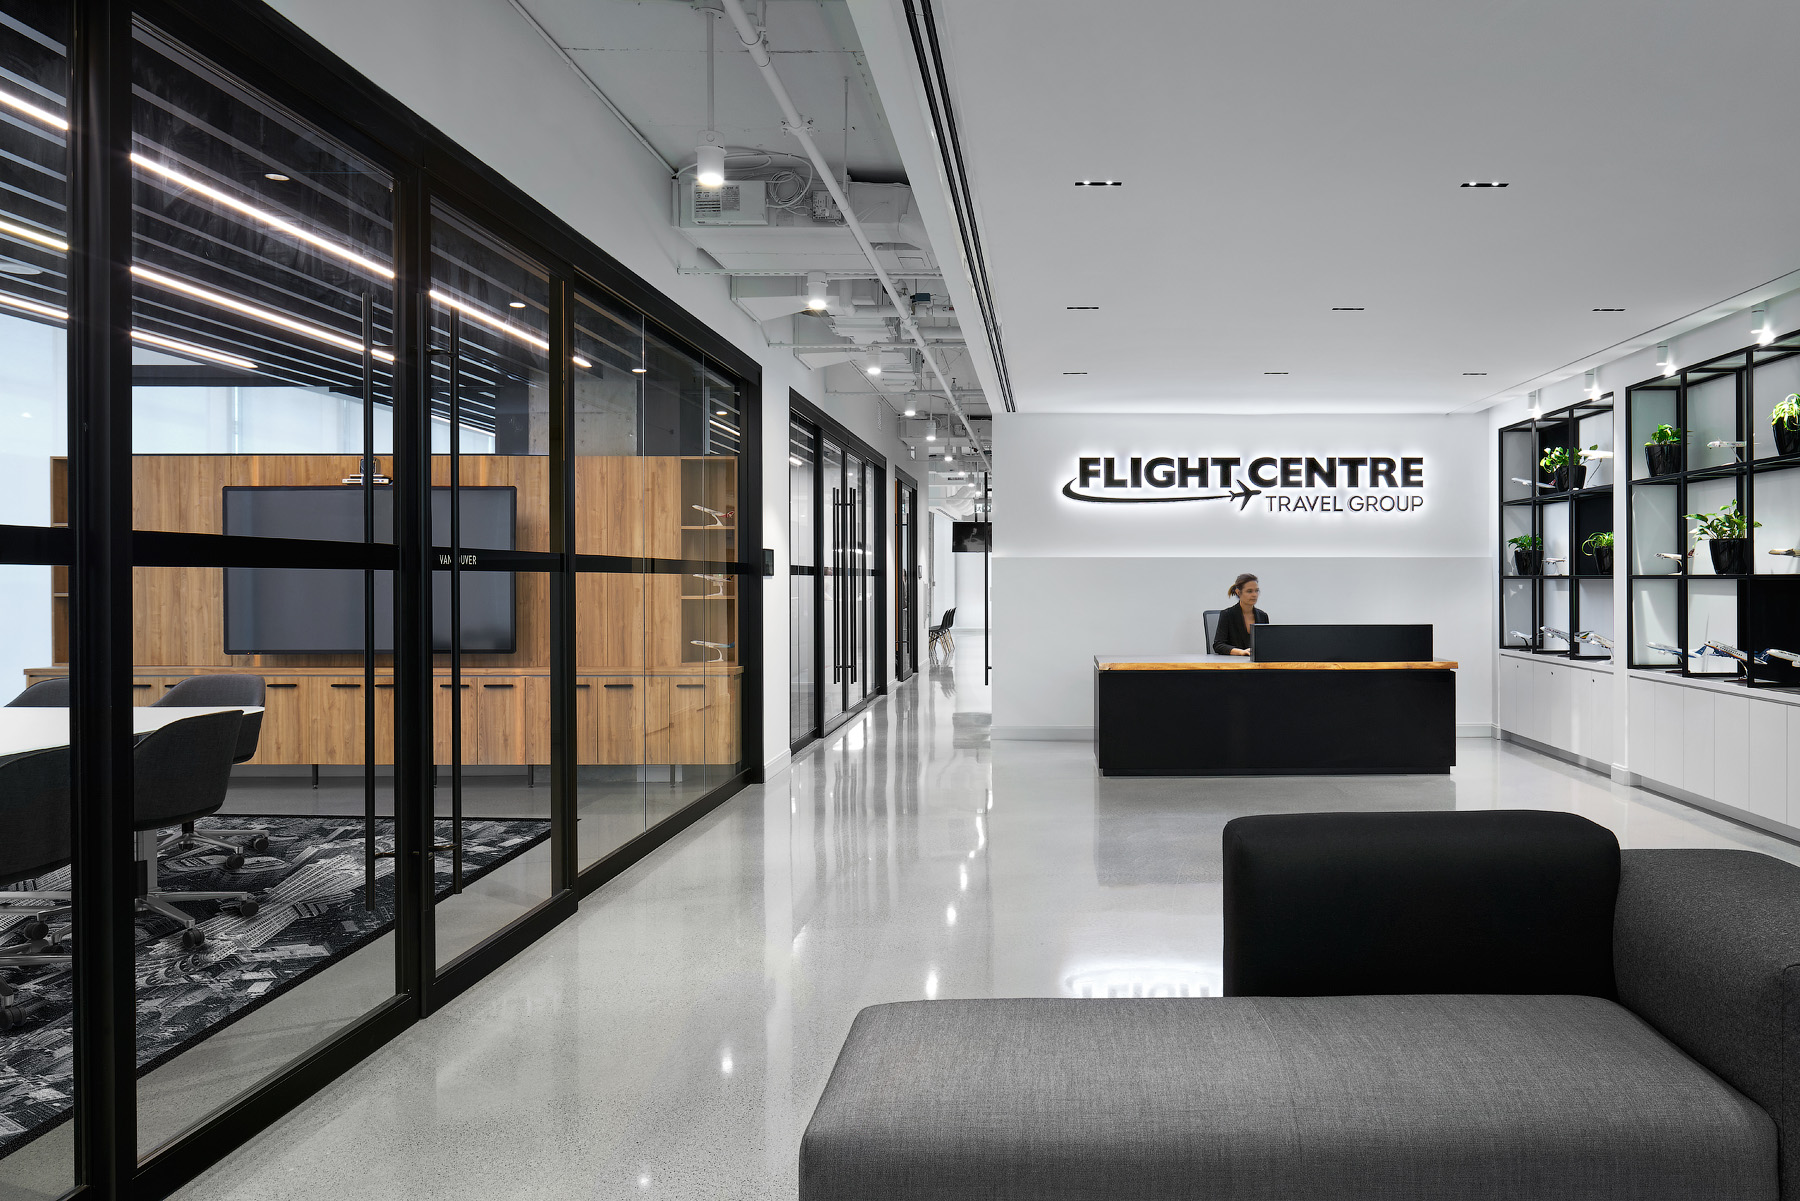 Flight Centre Vancouver reception area with Flight Centre logo, next to meeting room with glass walls